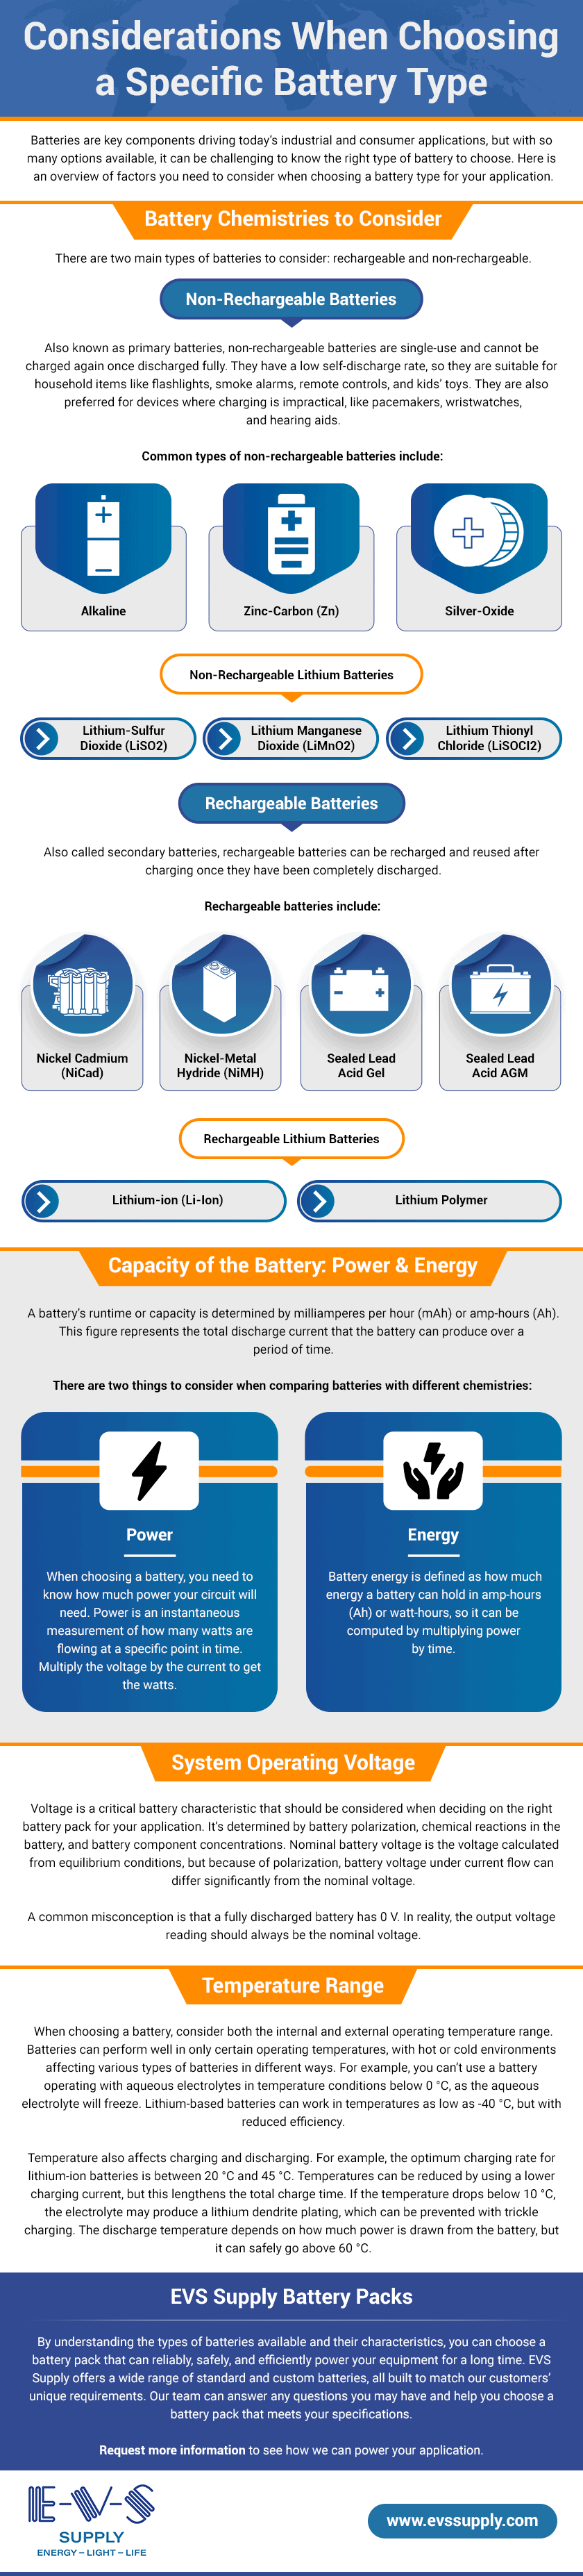 Considerations-When-Choosing-a-Specific-Battery-Type